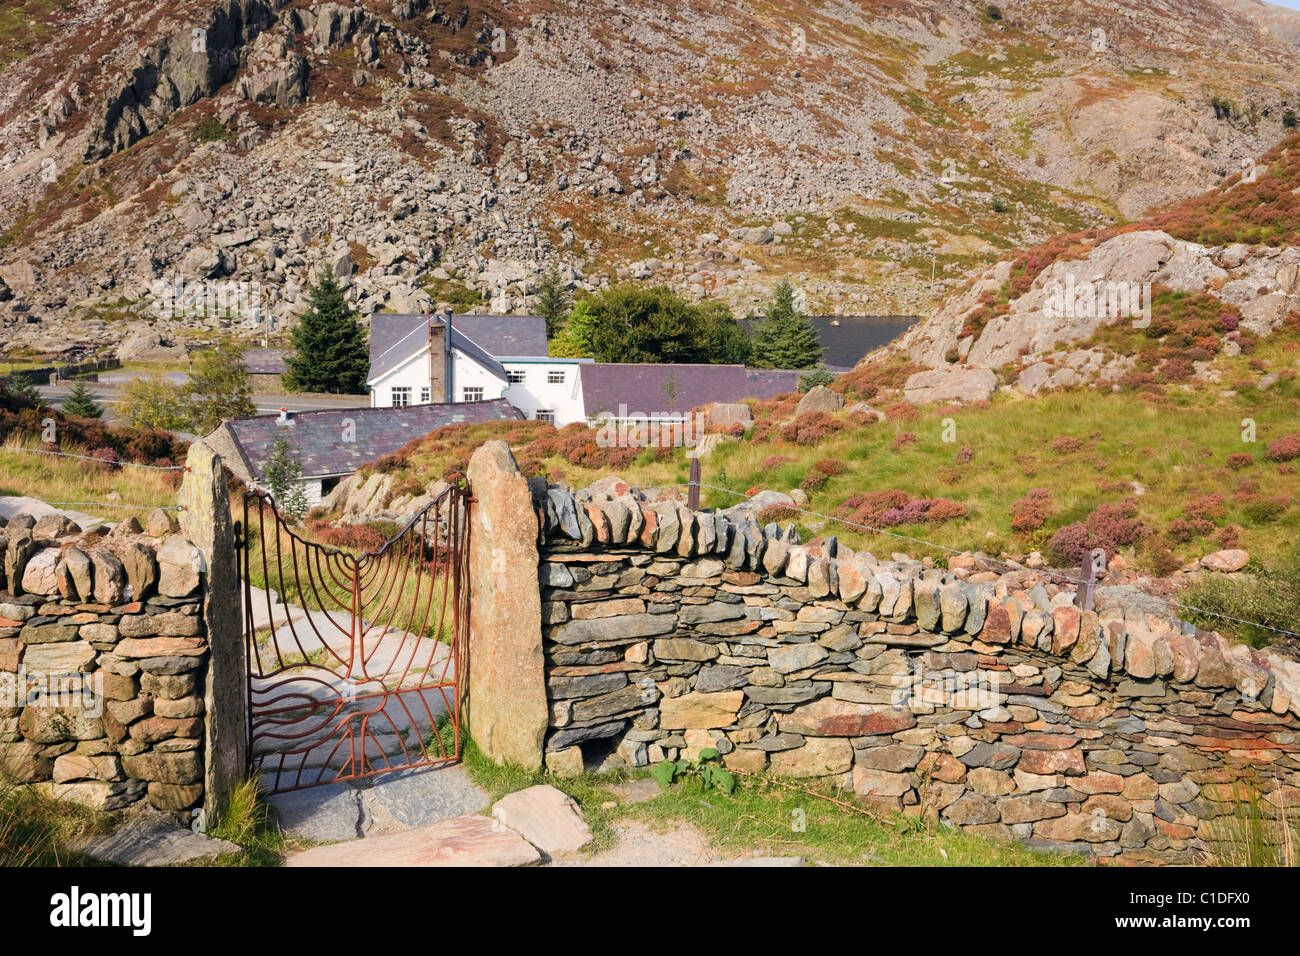 Ogwen Valley, Snowdonia, North Wales, UK. Footpath from Cwm Idwal with Ogwen Cottage Outdoor Pursuits Centre beyond drystone wall Stock Photo